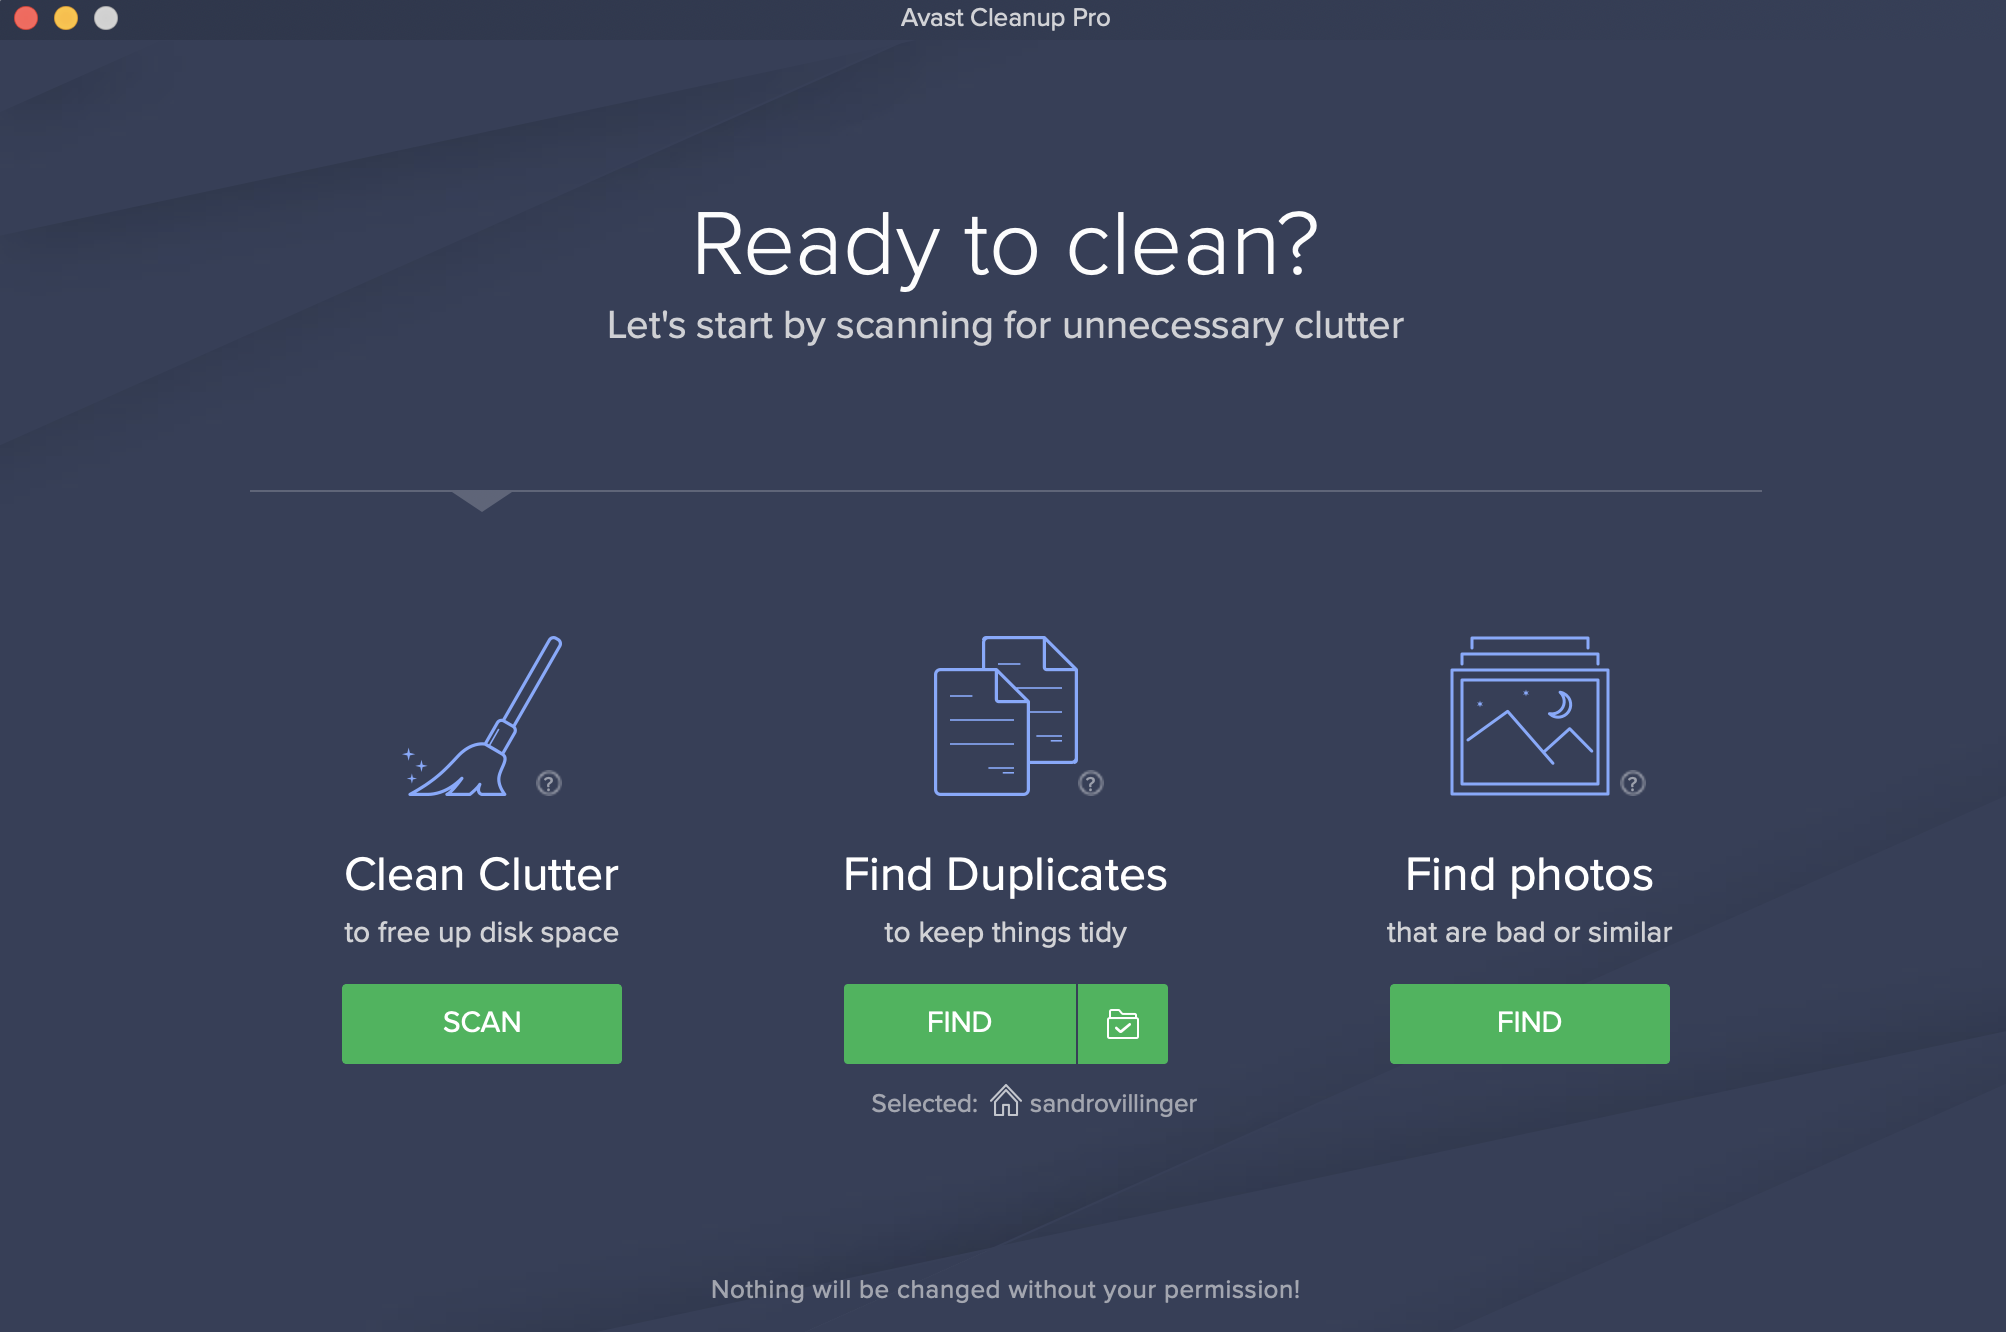 ready-to-clean-avast-photo-cleaner-mac